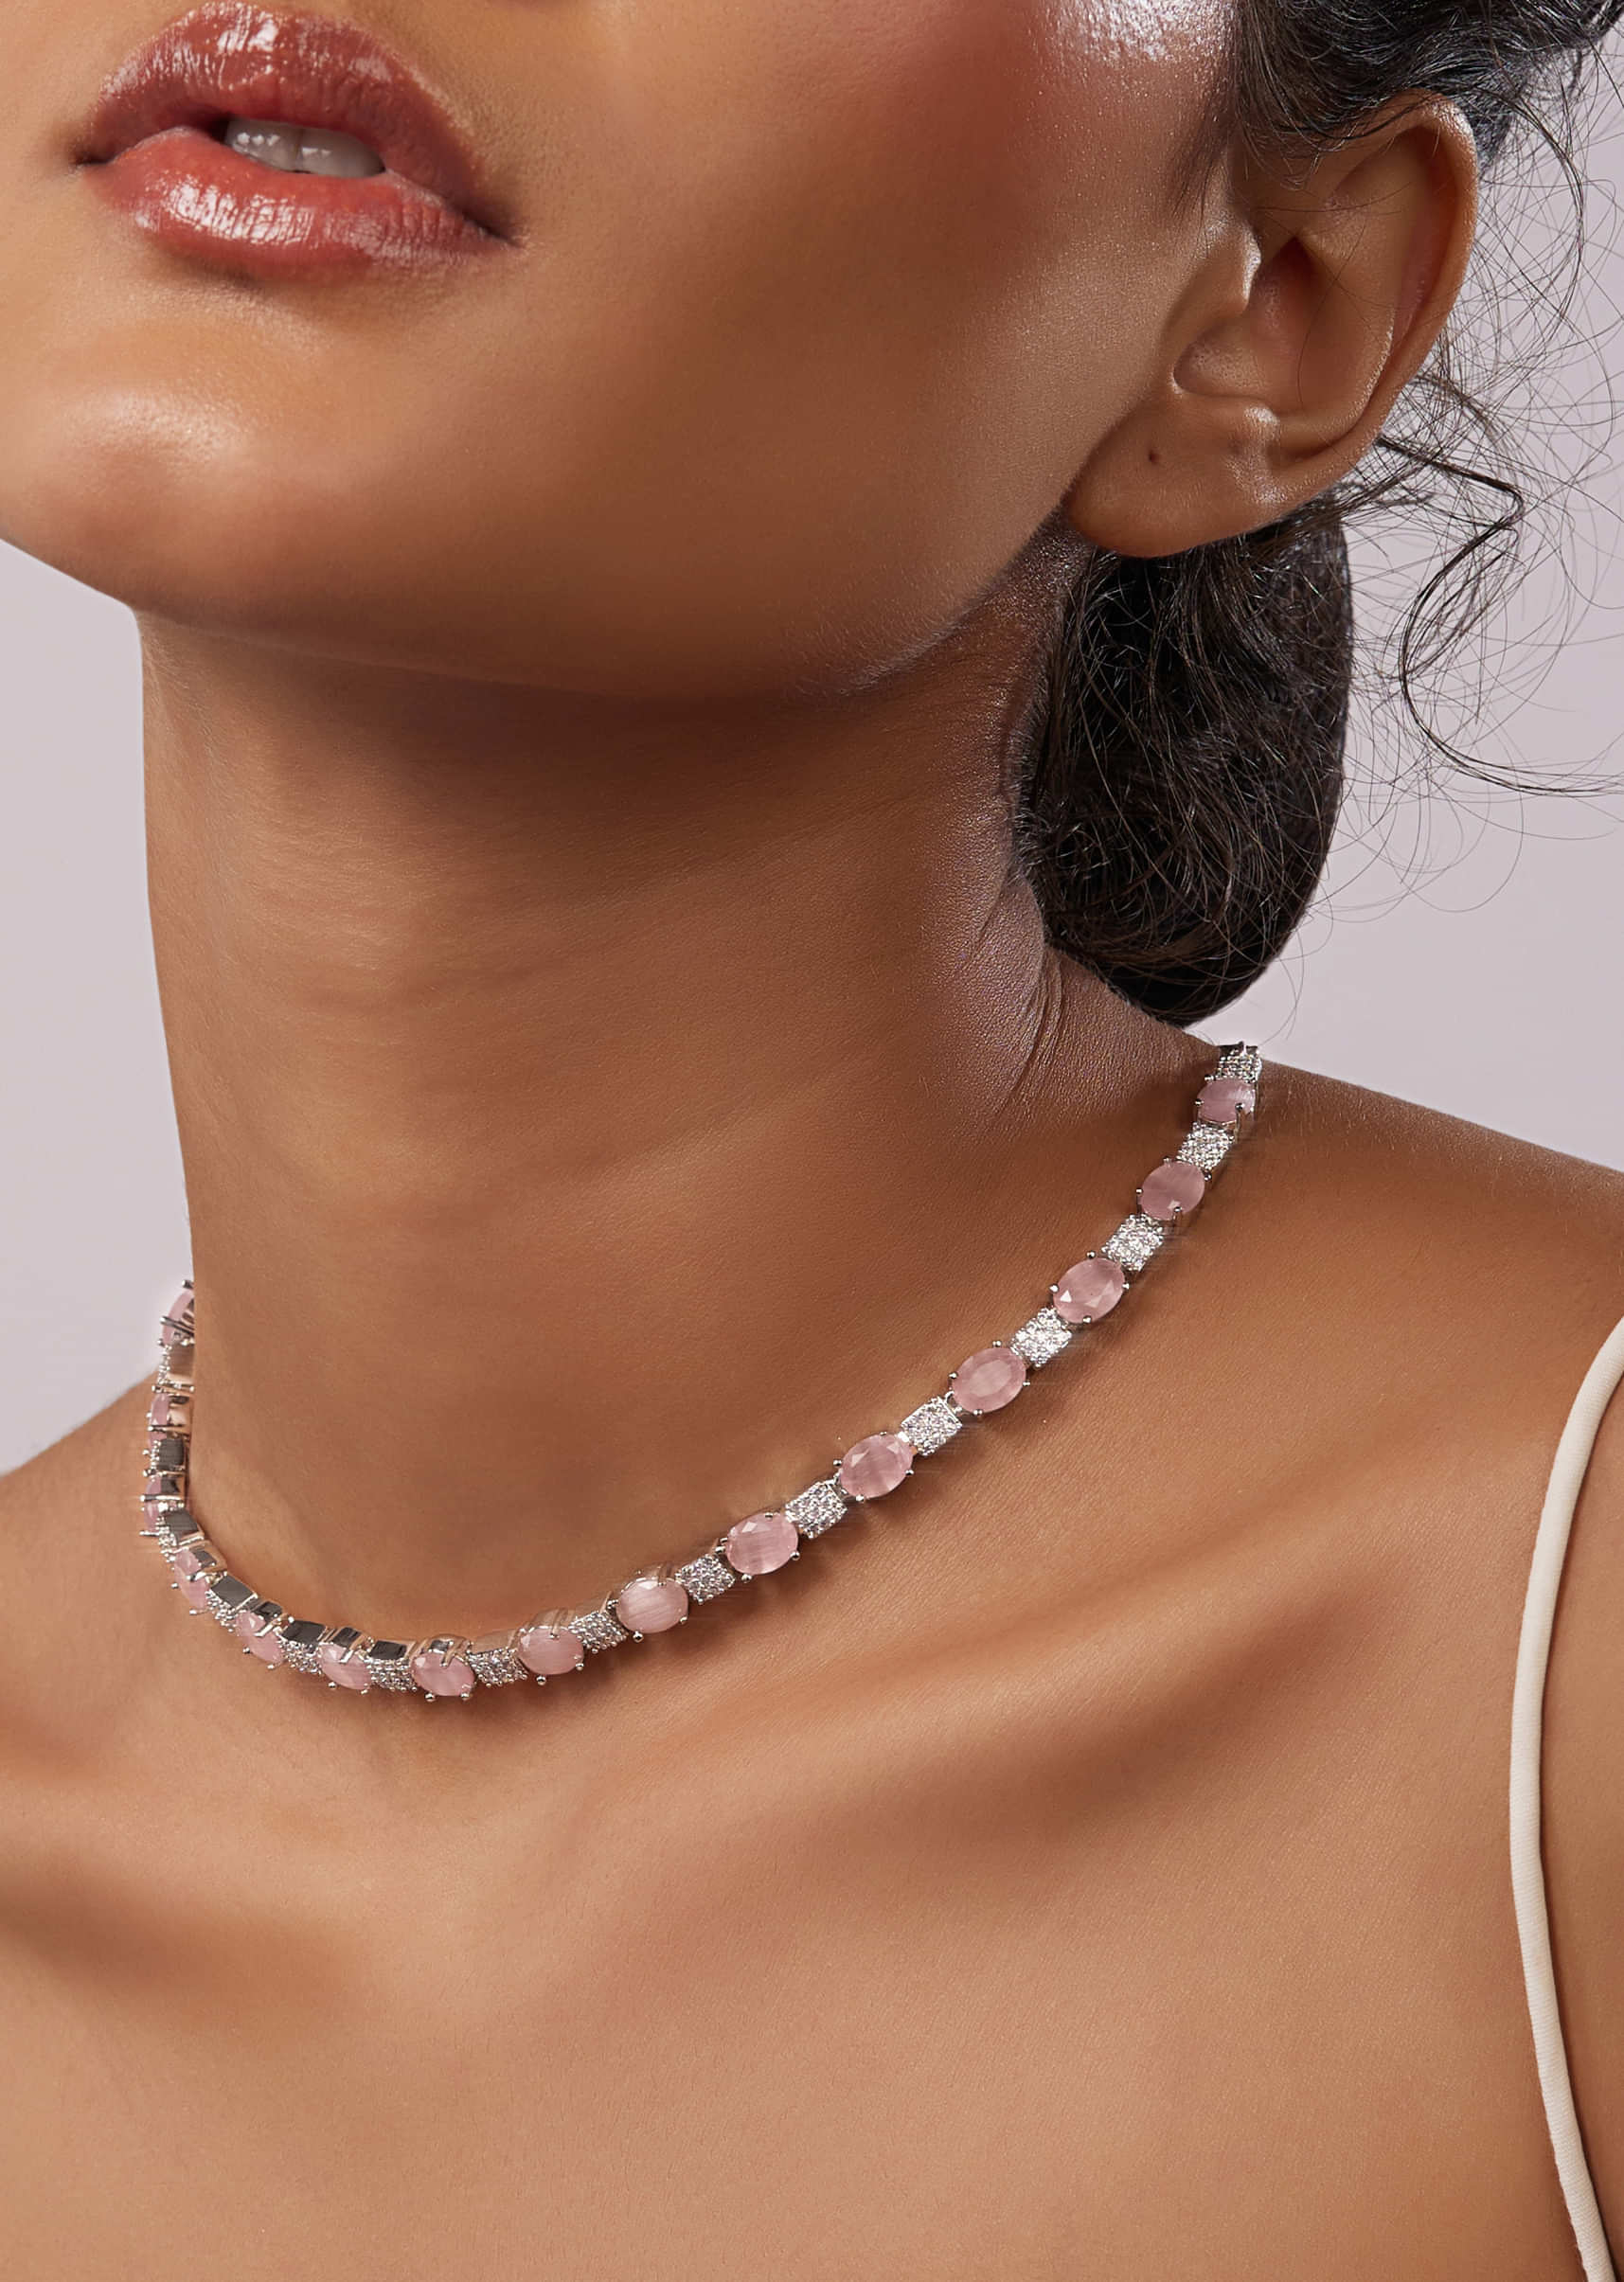 Diamond Necklace Set With Silver Plating And Baby Pink Stones